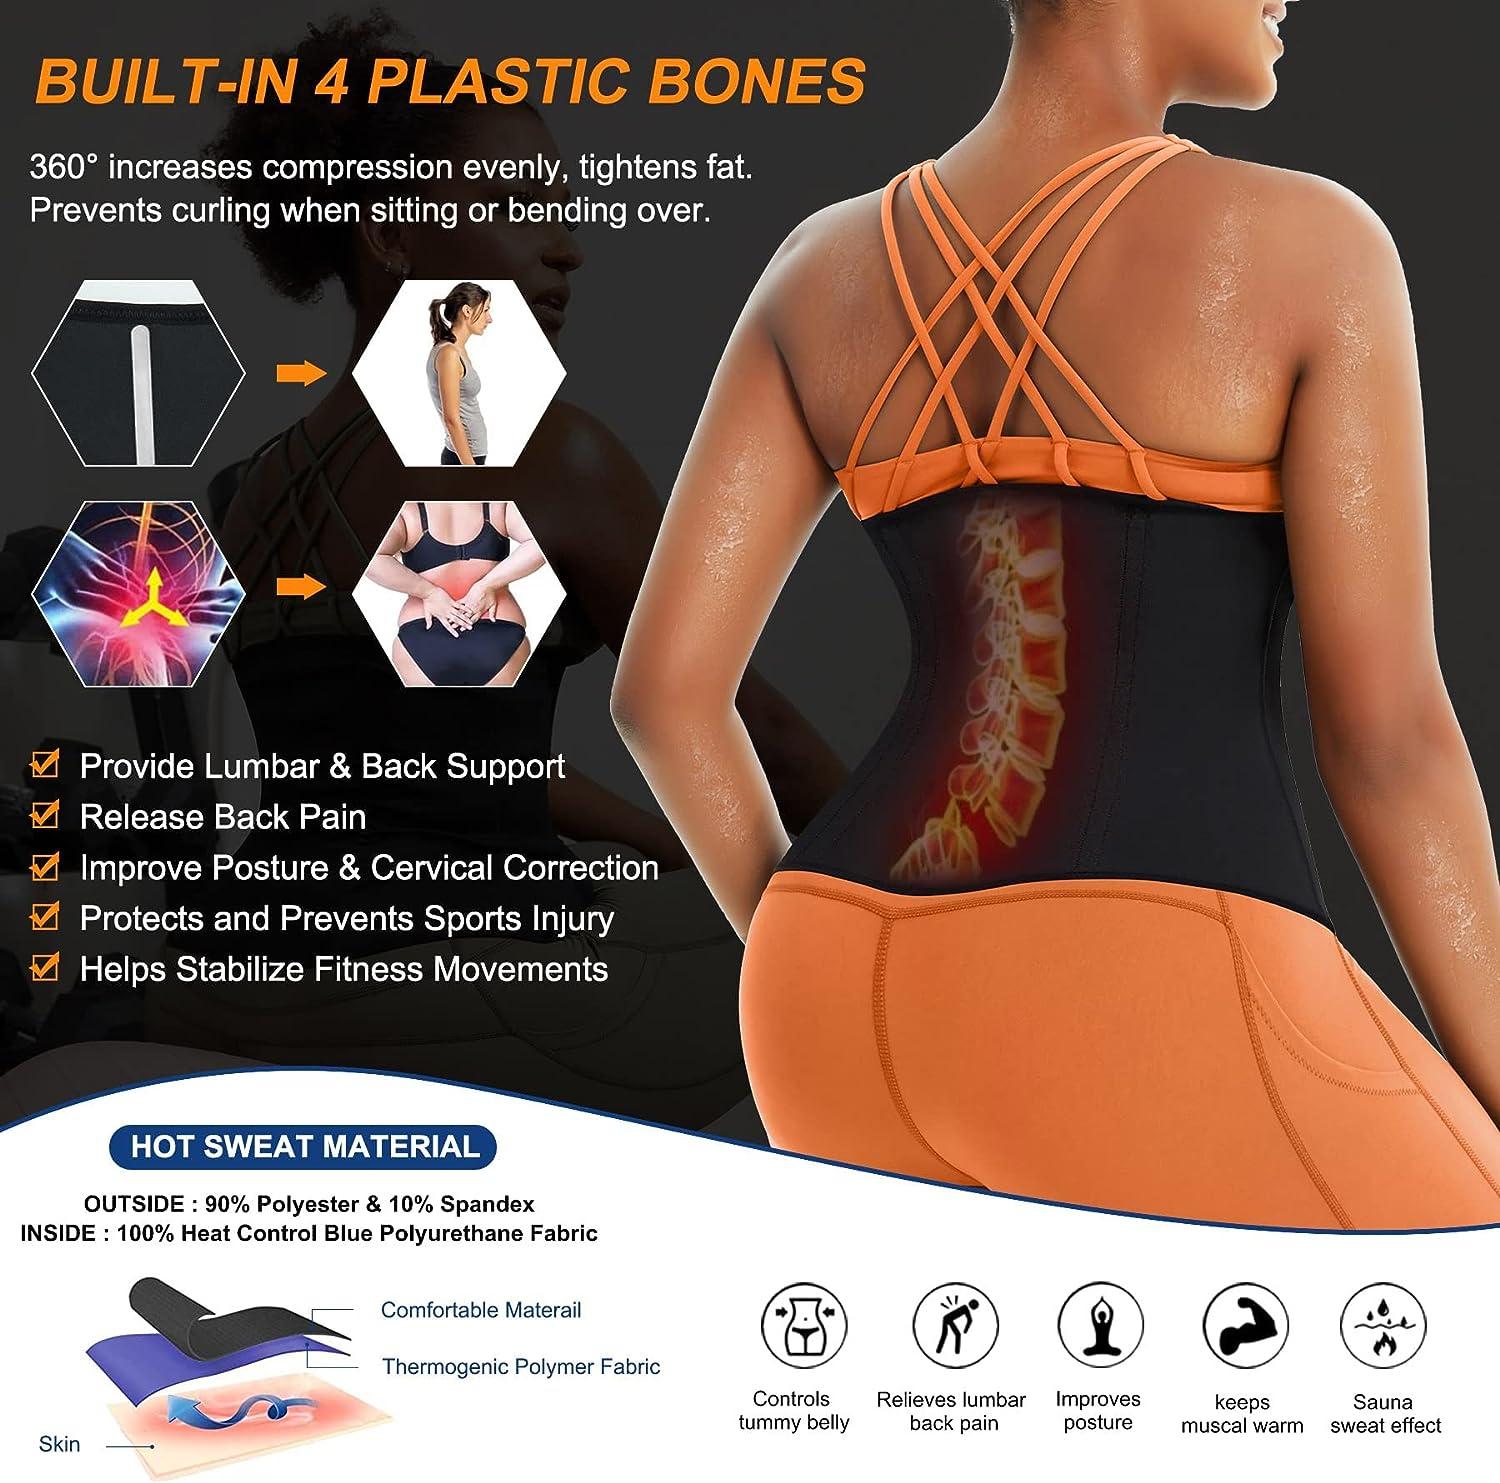  Waist Trimmers - Waist Trimmers / Exercise & Fitness  Accessories: Sports & Outdoors